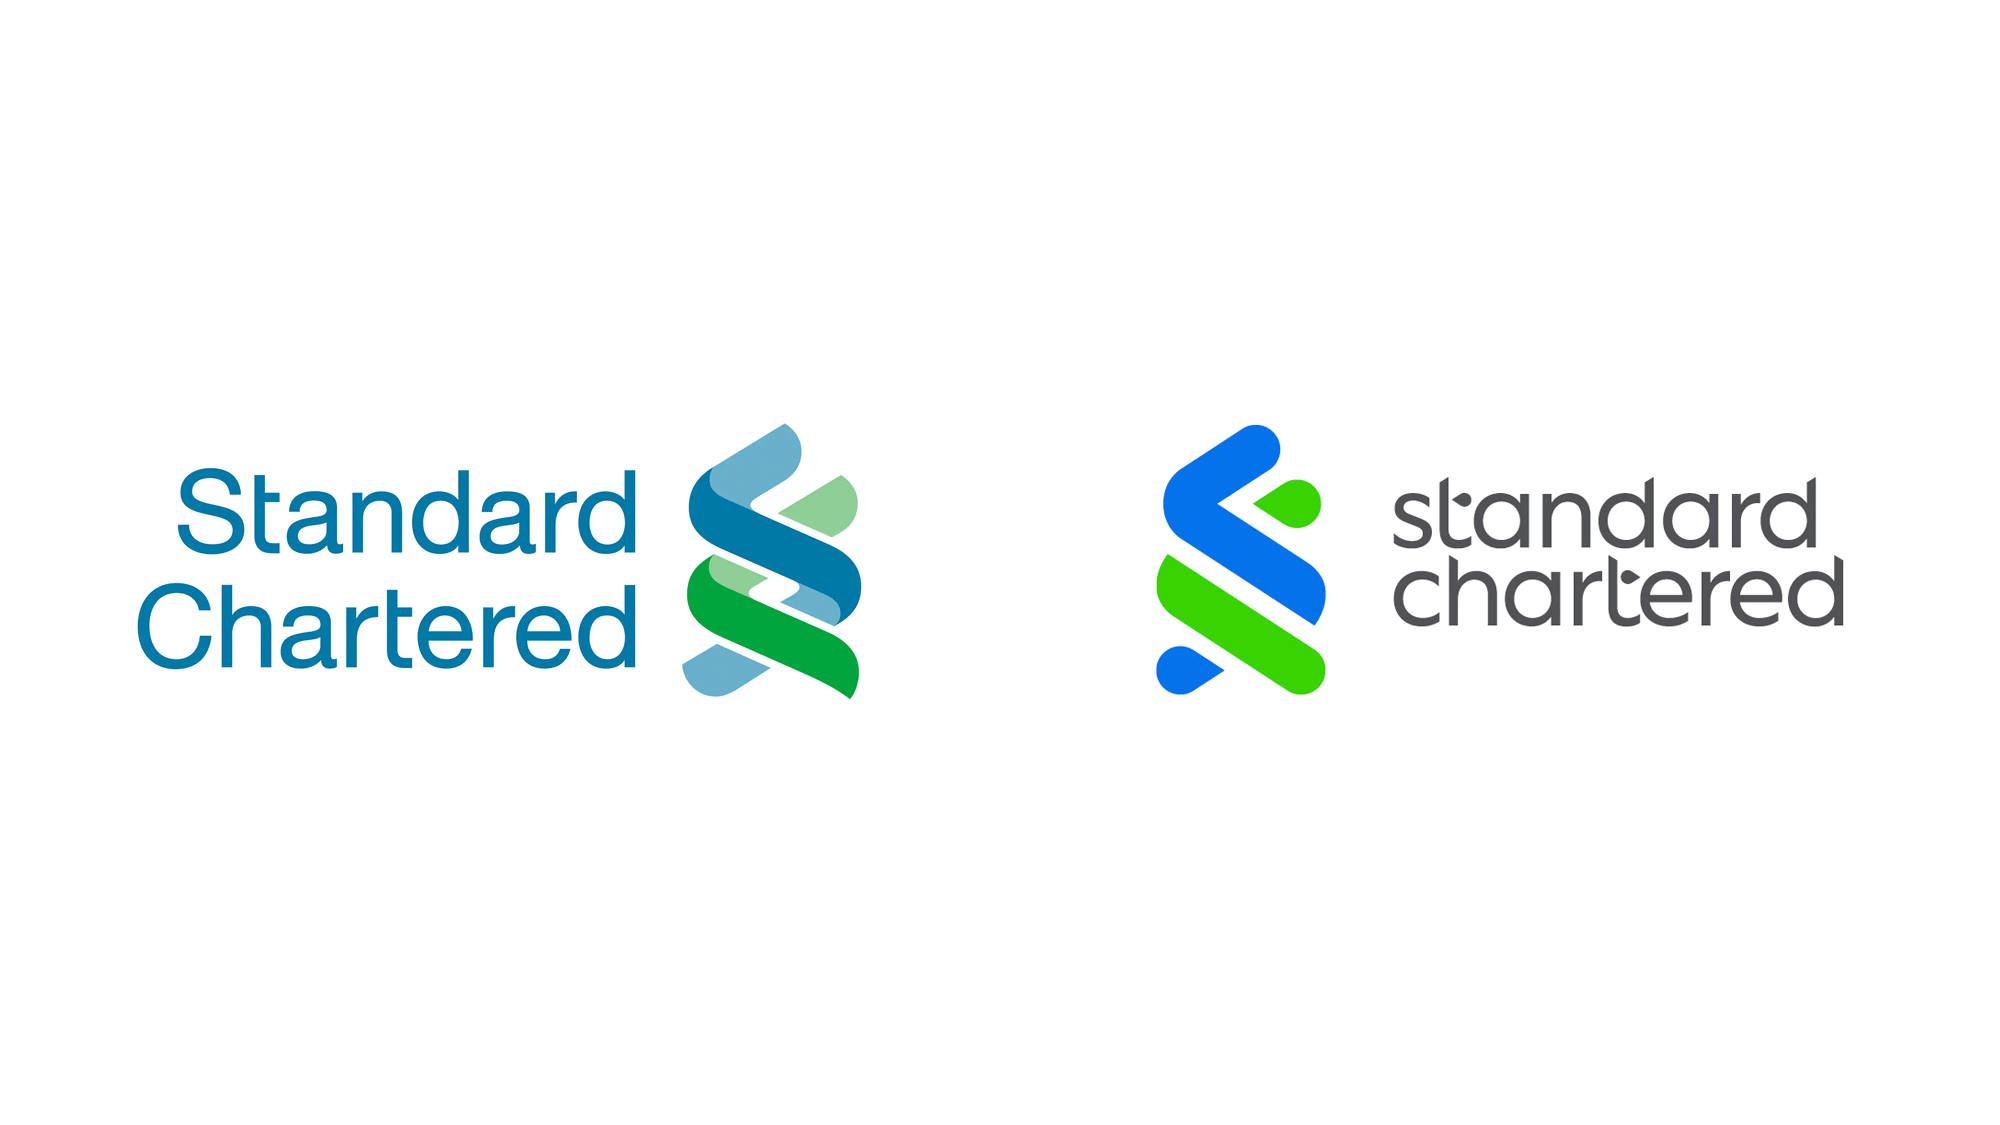 Brand New: New Logo and Identity for Standard Chartered by Lippincott